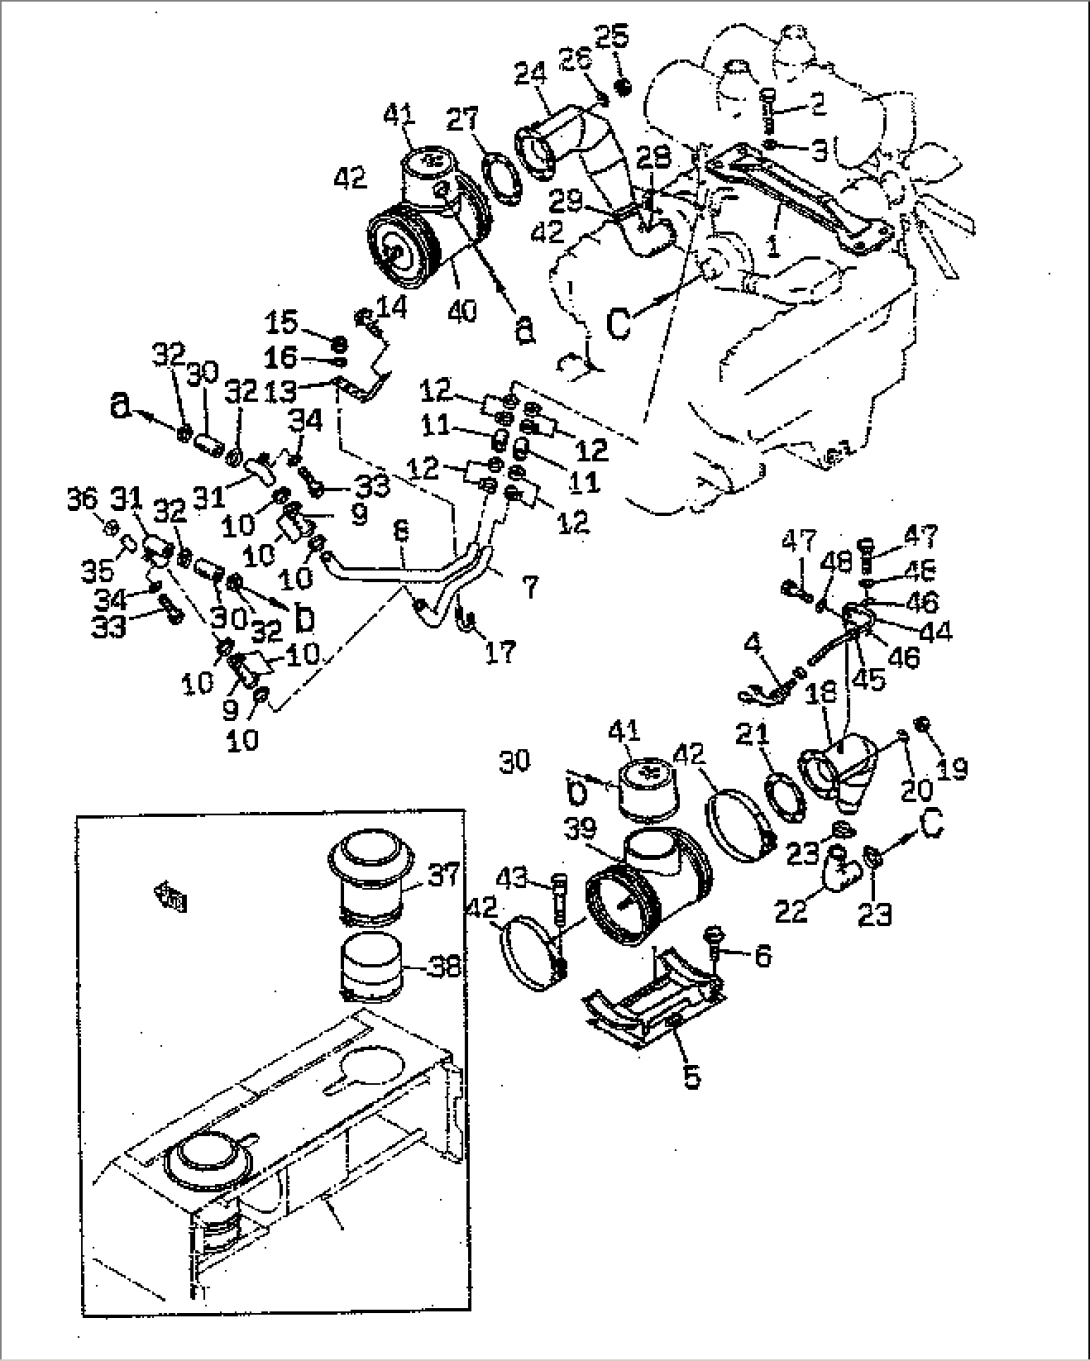 ENGINE (ENGINE AND AIR CLEANER MOUNTING PARTS) (WITH AIR INTAKE EXTENSION)(#50001-50006)